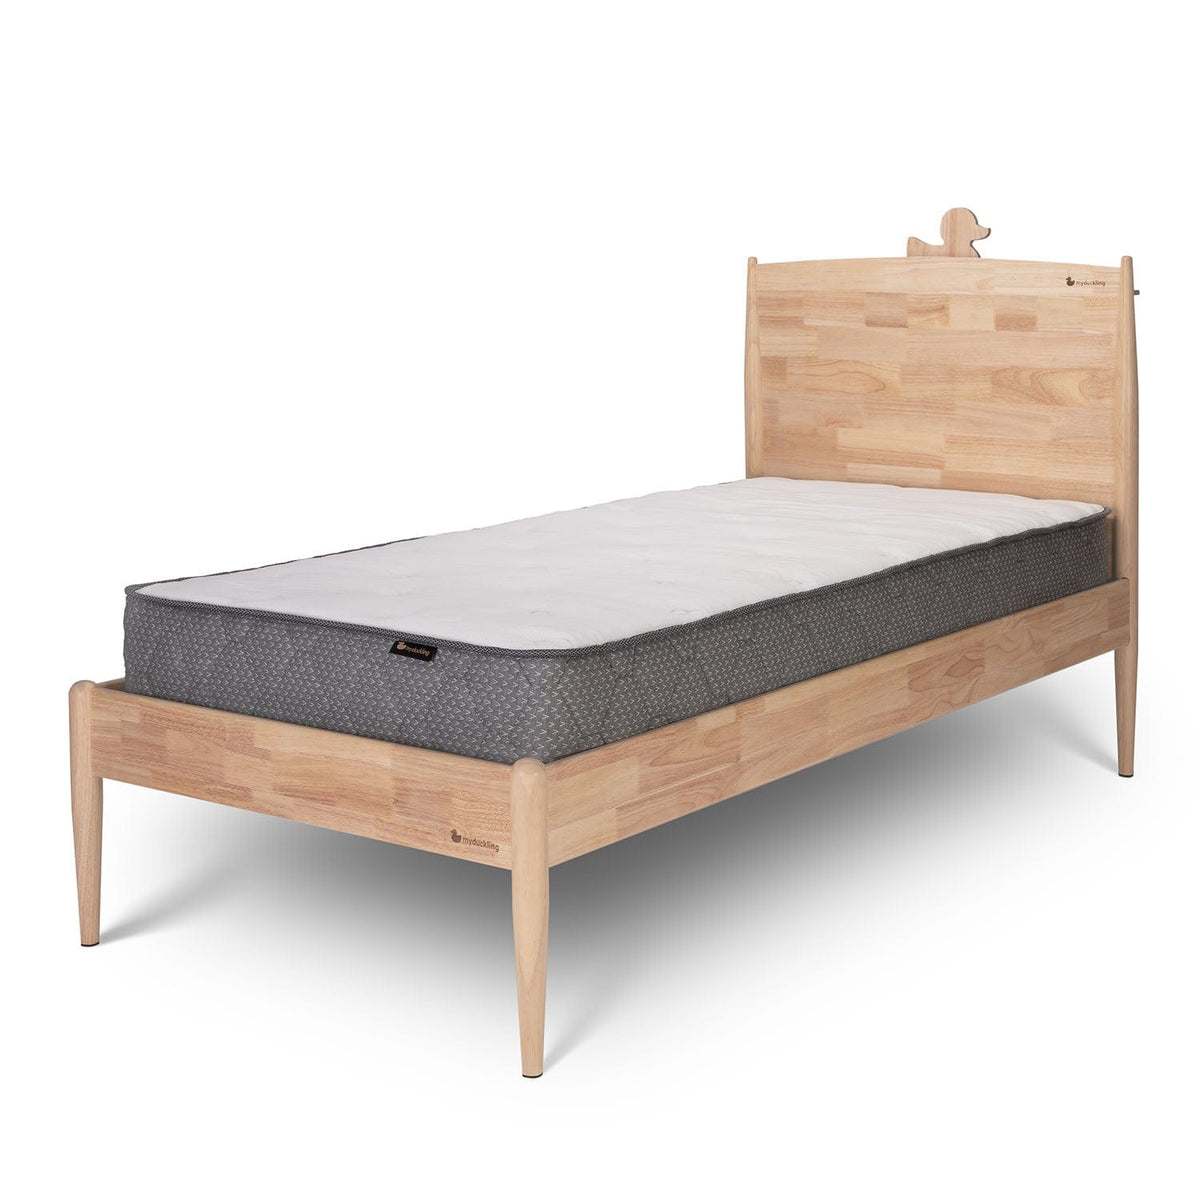 My Duckling Natural Solid Wood Kids Single Bed with Shelf Headboard